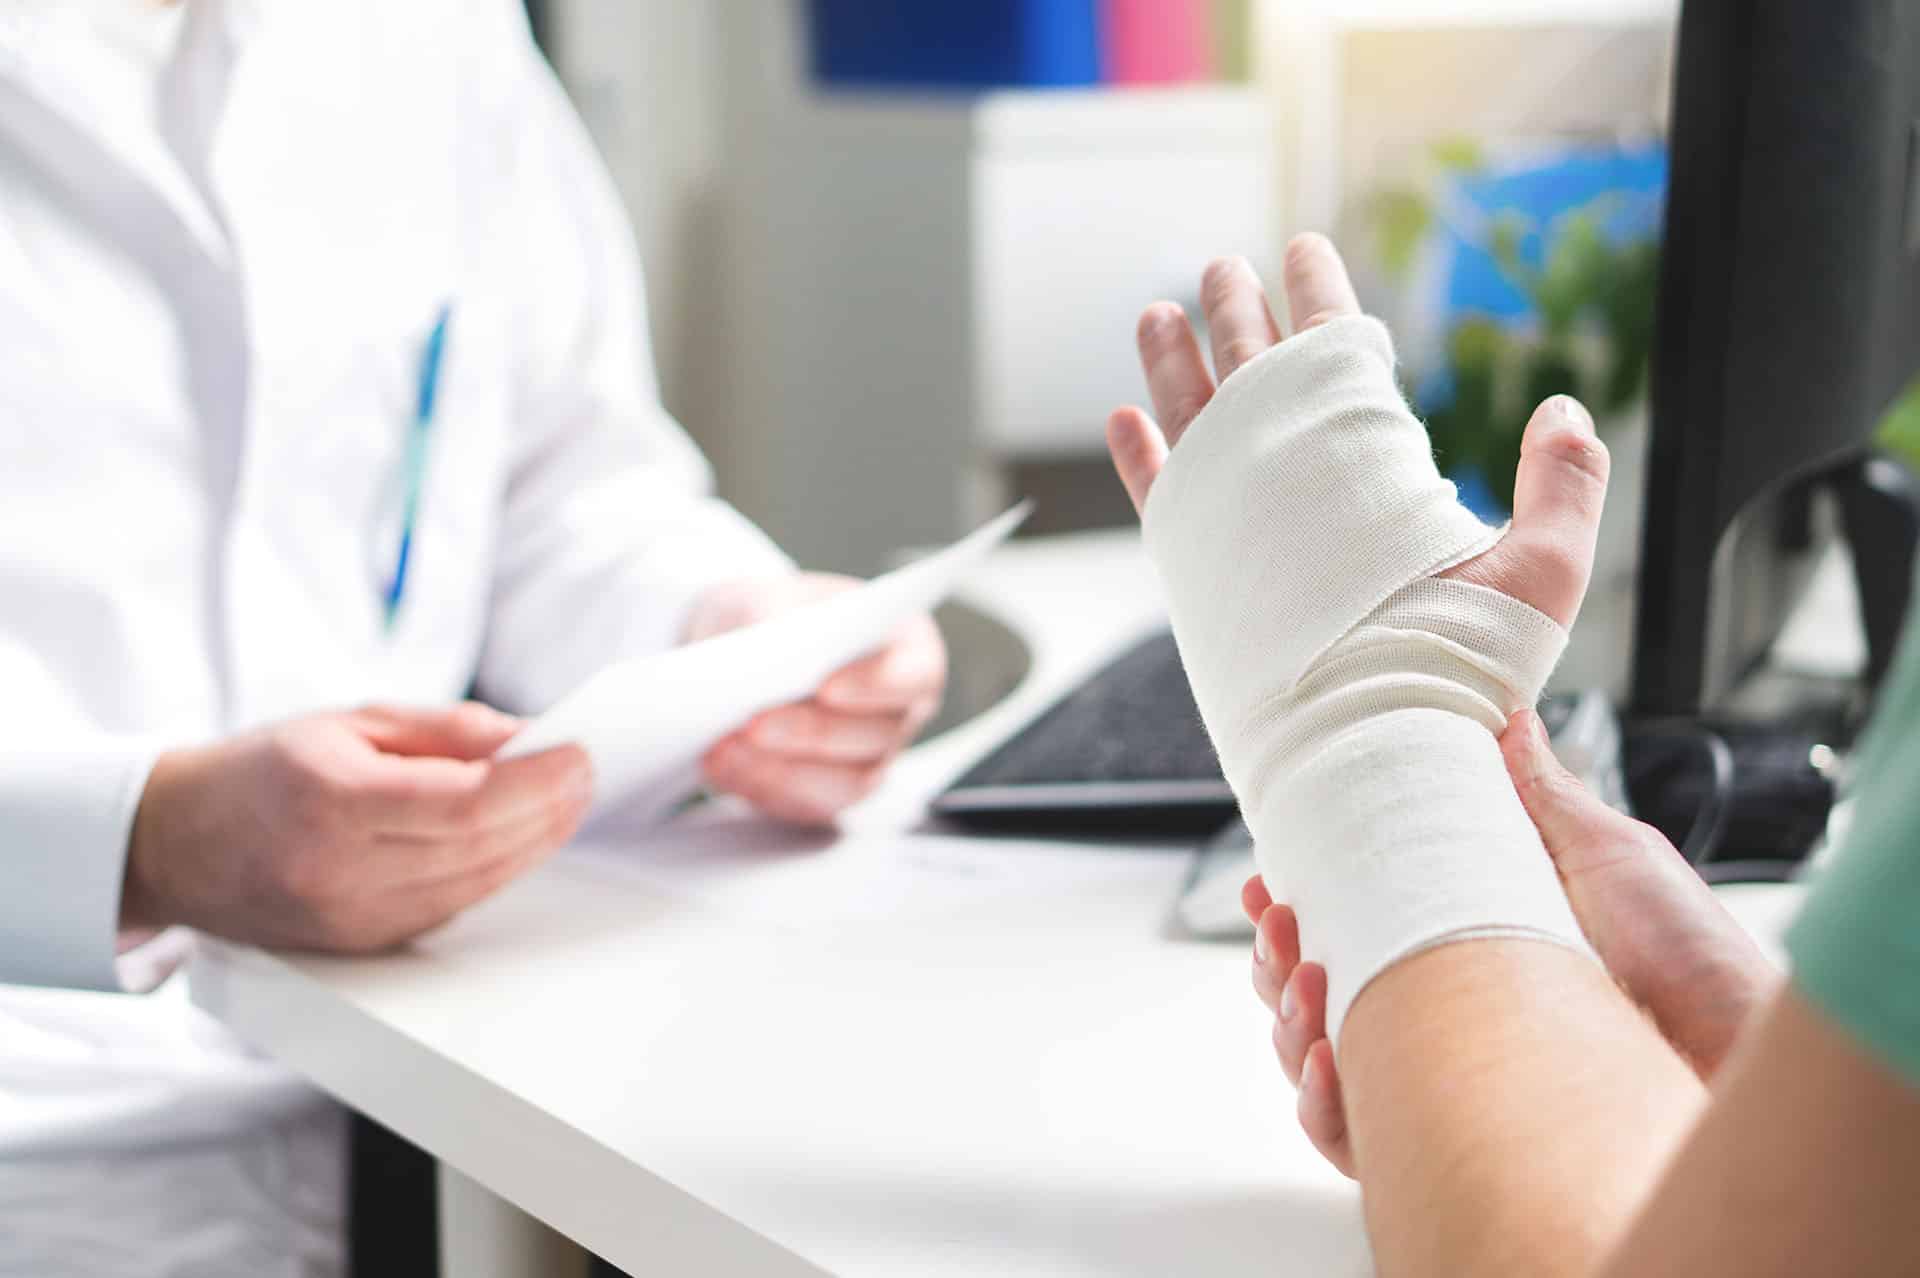 Injured patient showing doctor broken wrist and arm with bandage in hospital office or emergency room.